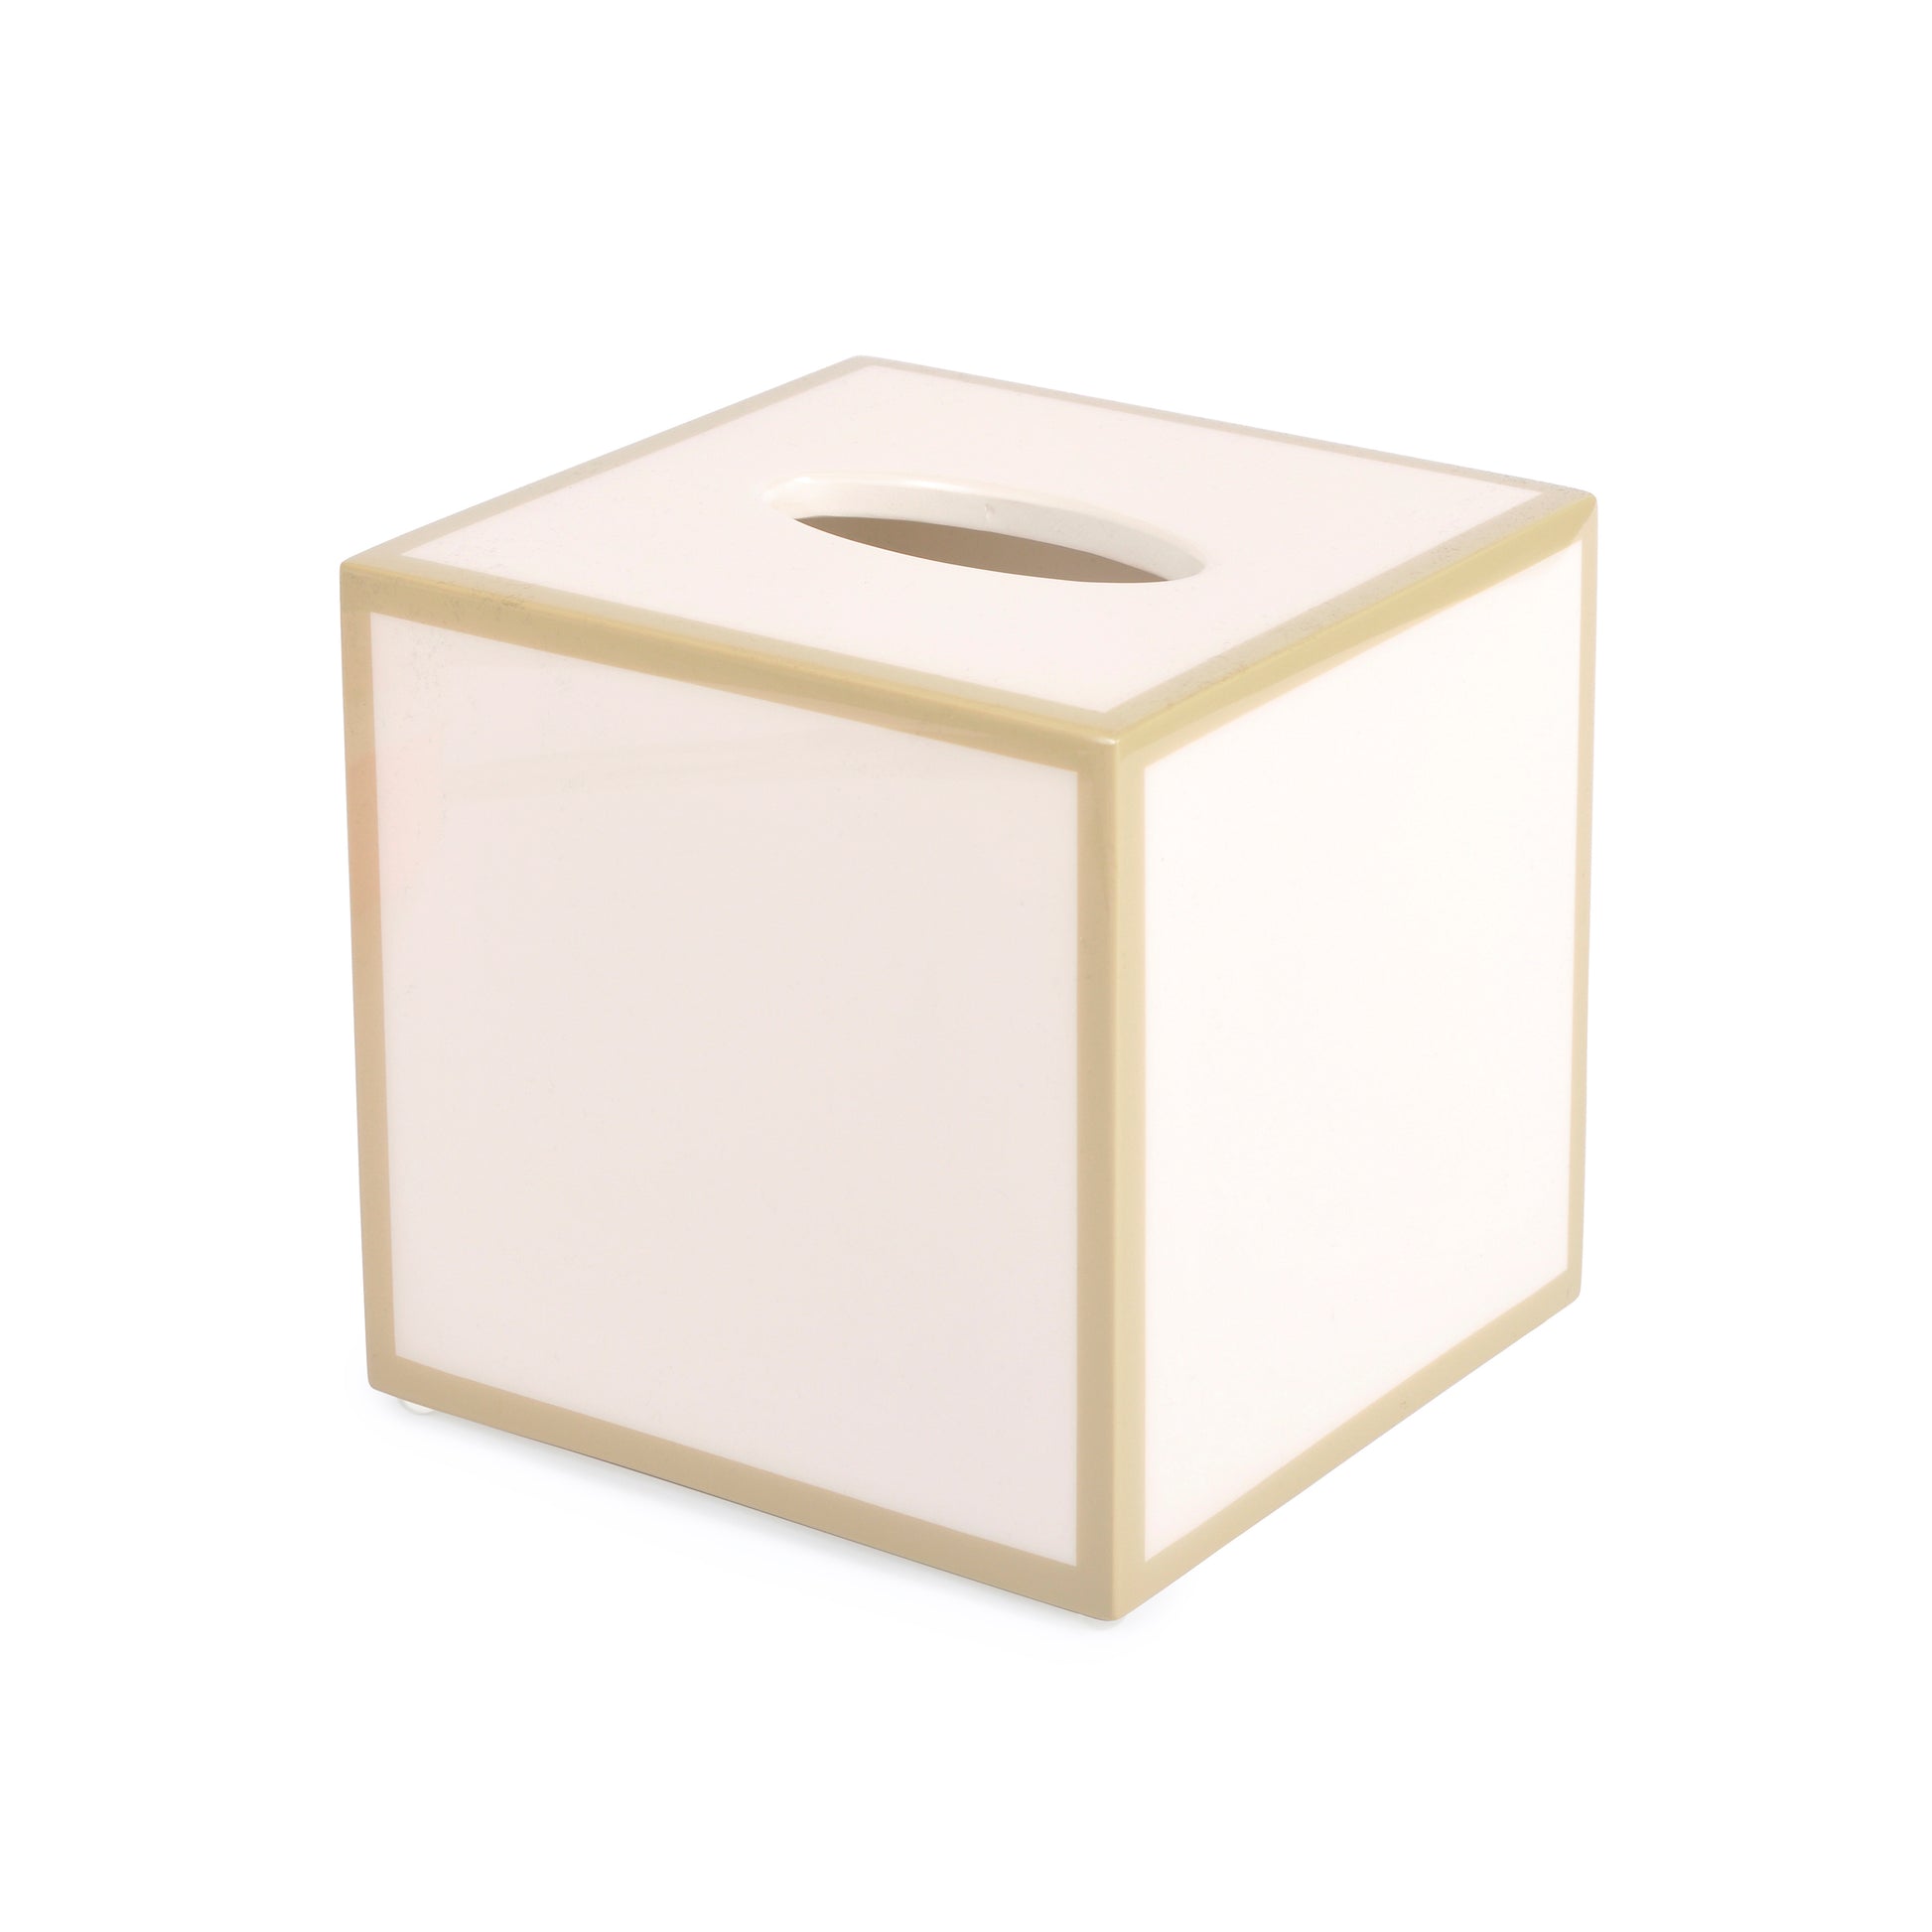 Lacquer Square Tissue Box Cover White and Taupe Joanna Wood Shop